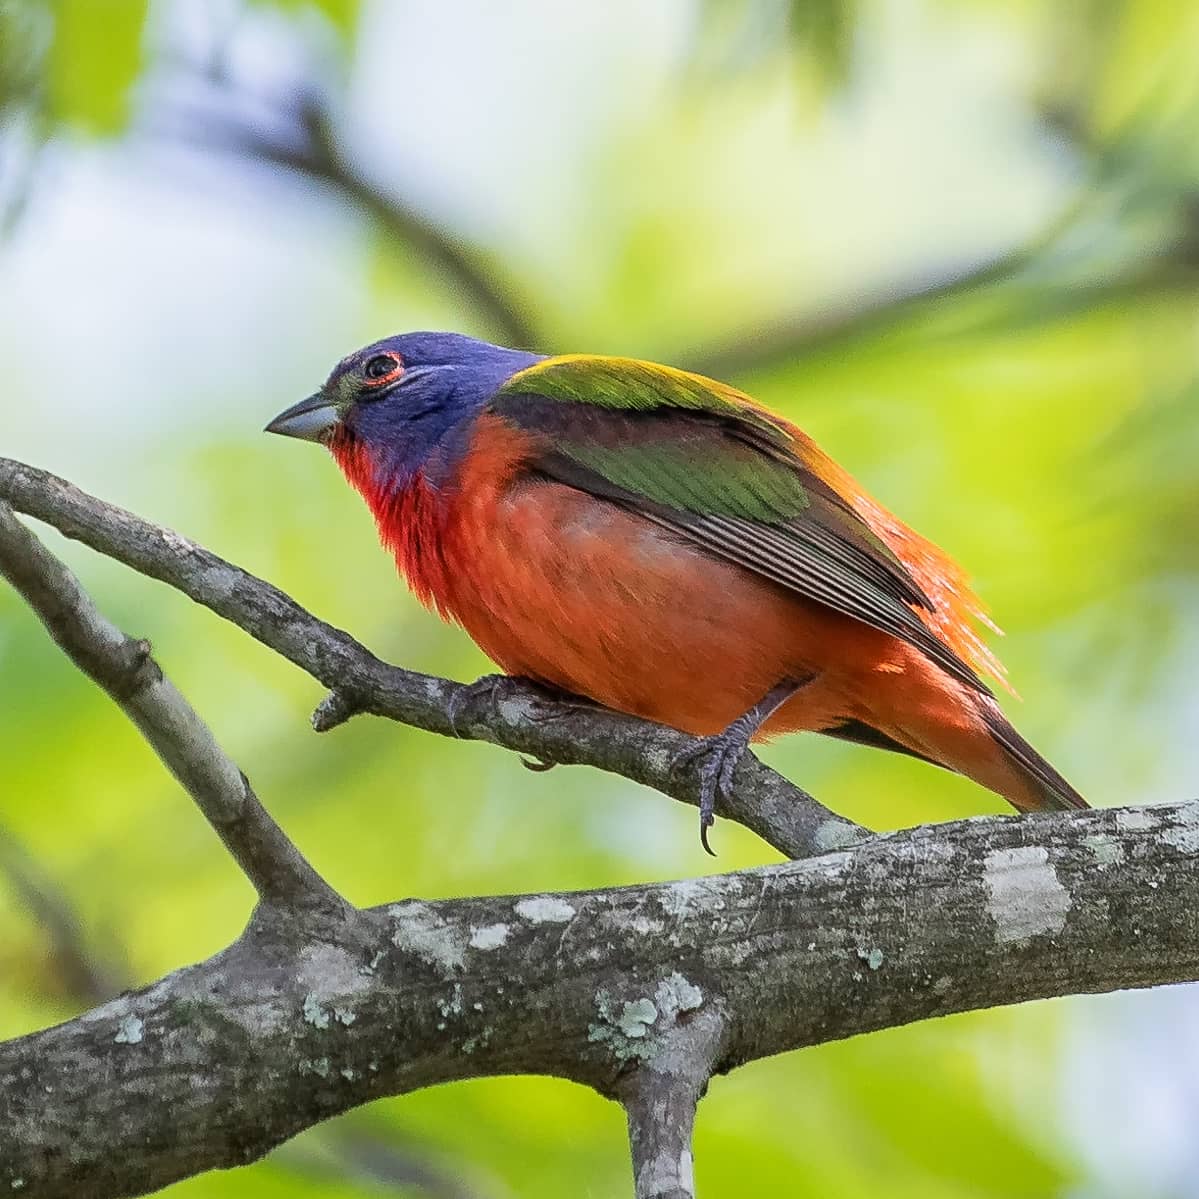 One of spring's prettiest birds, the painted bunting, showed up briefly. #arkansas #nature #spring #bird #paintedbunting #birdphotography #birdwatching